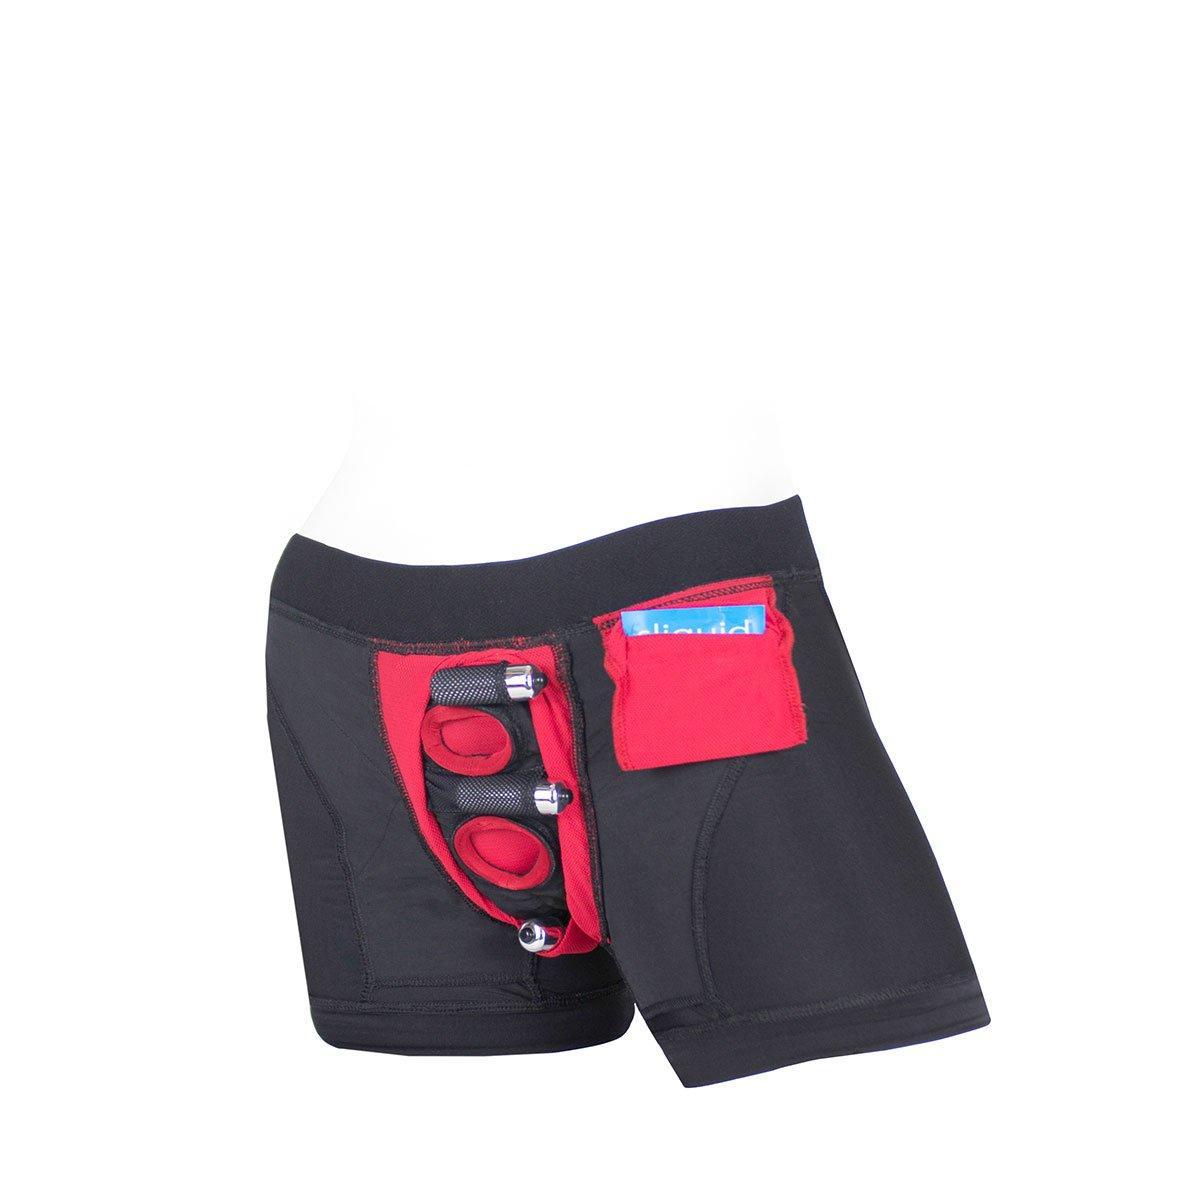 Tomato SpareParts Tomboii Black and Red